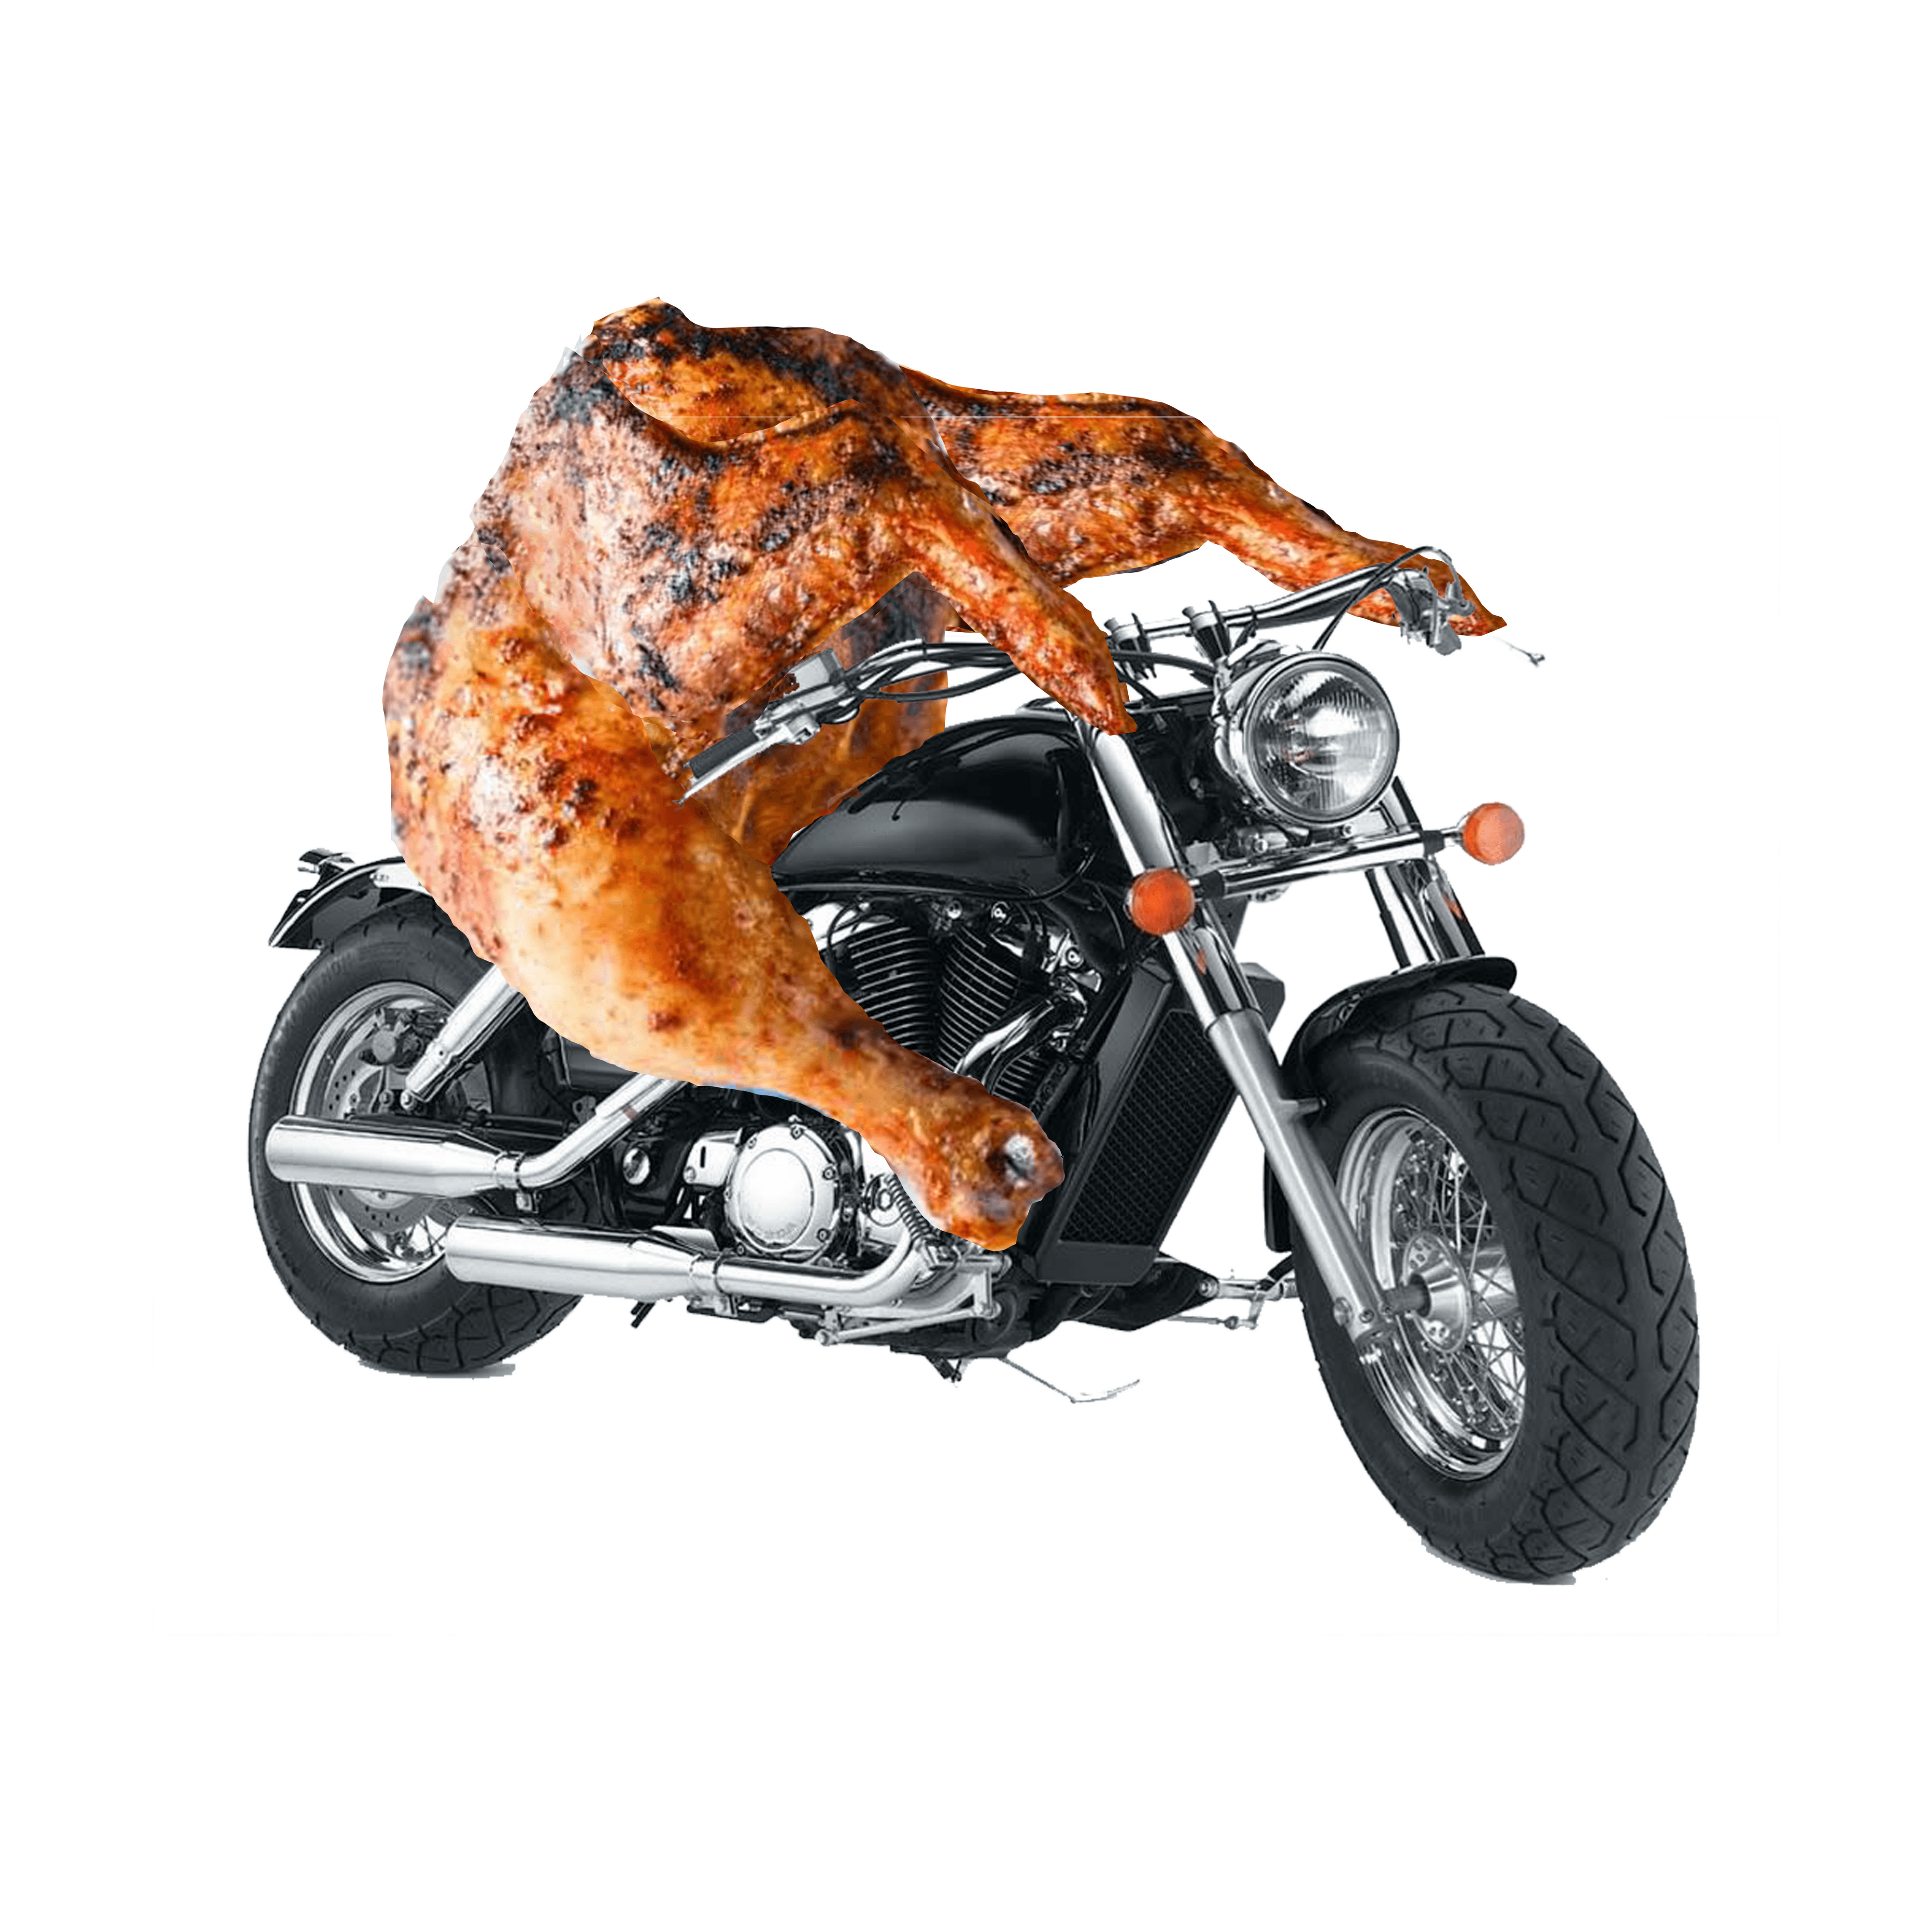 Roast Chicken Riding a Motorcycle, 2022